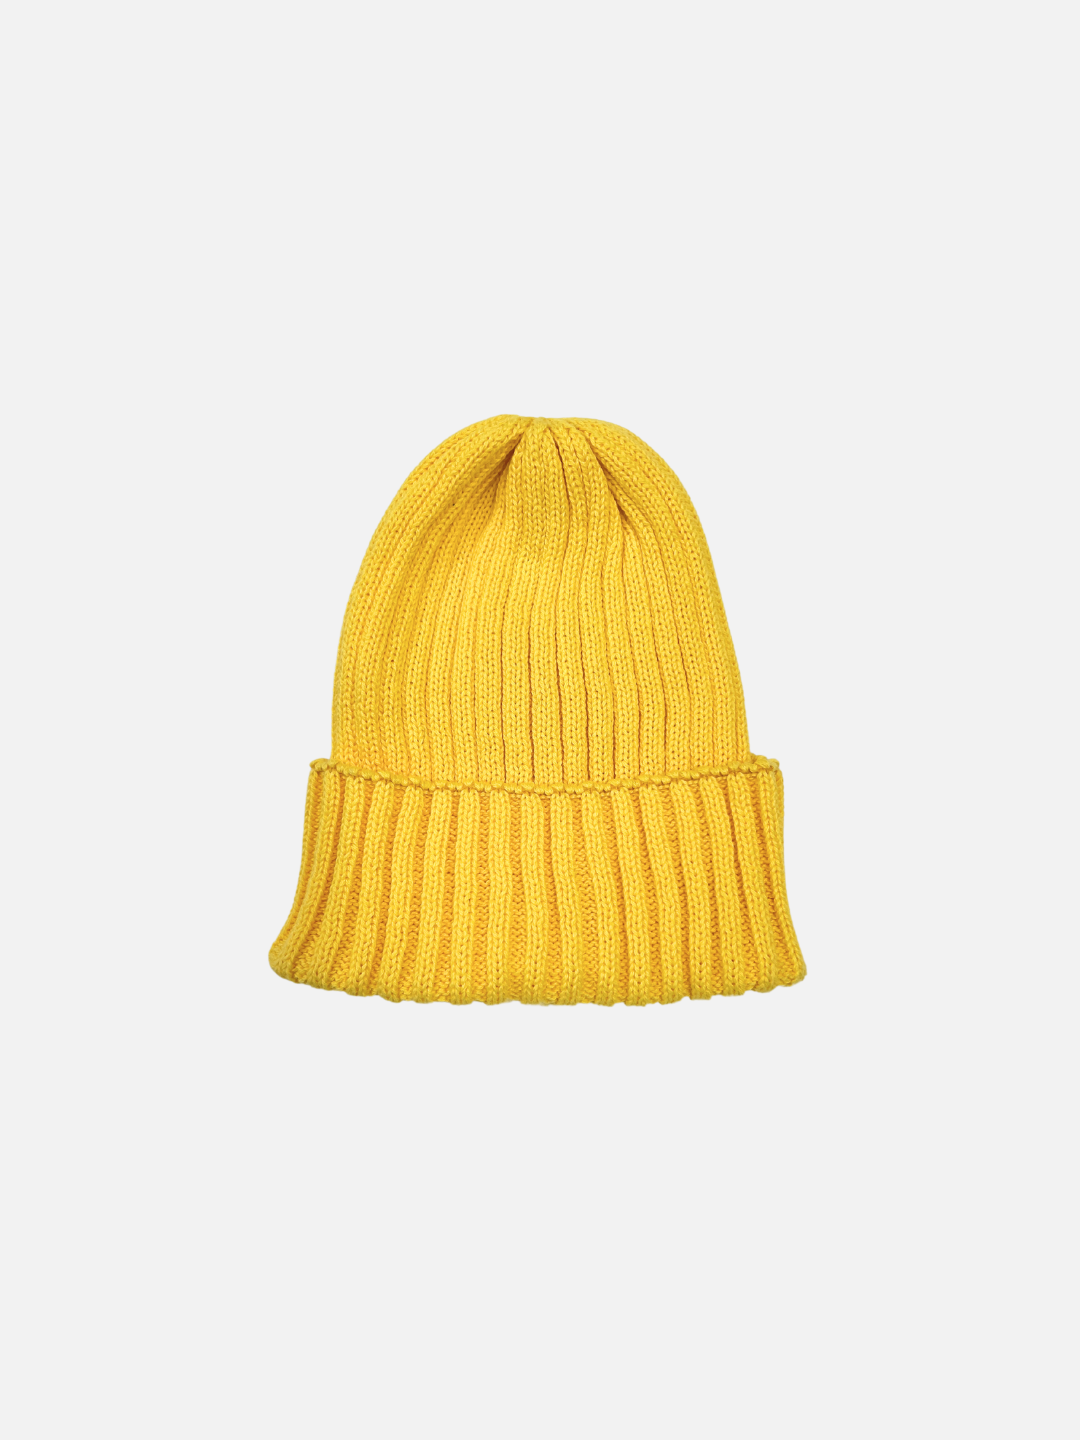 Front view of the Yellow Spring Rib Knit Baby Beanie